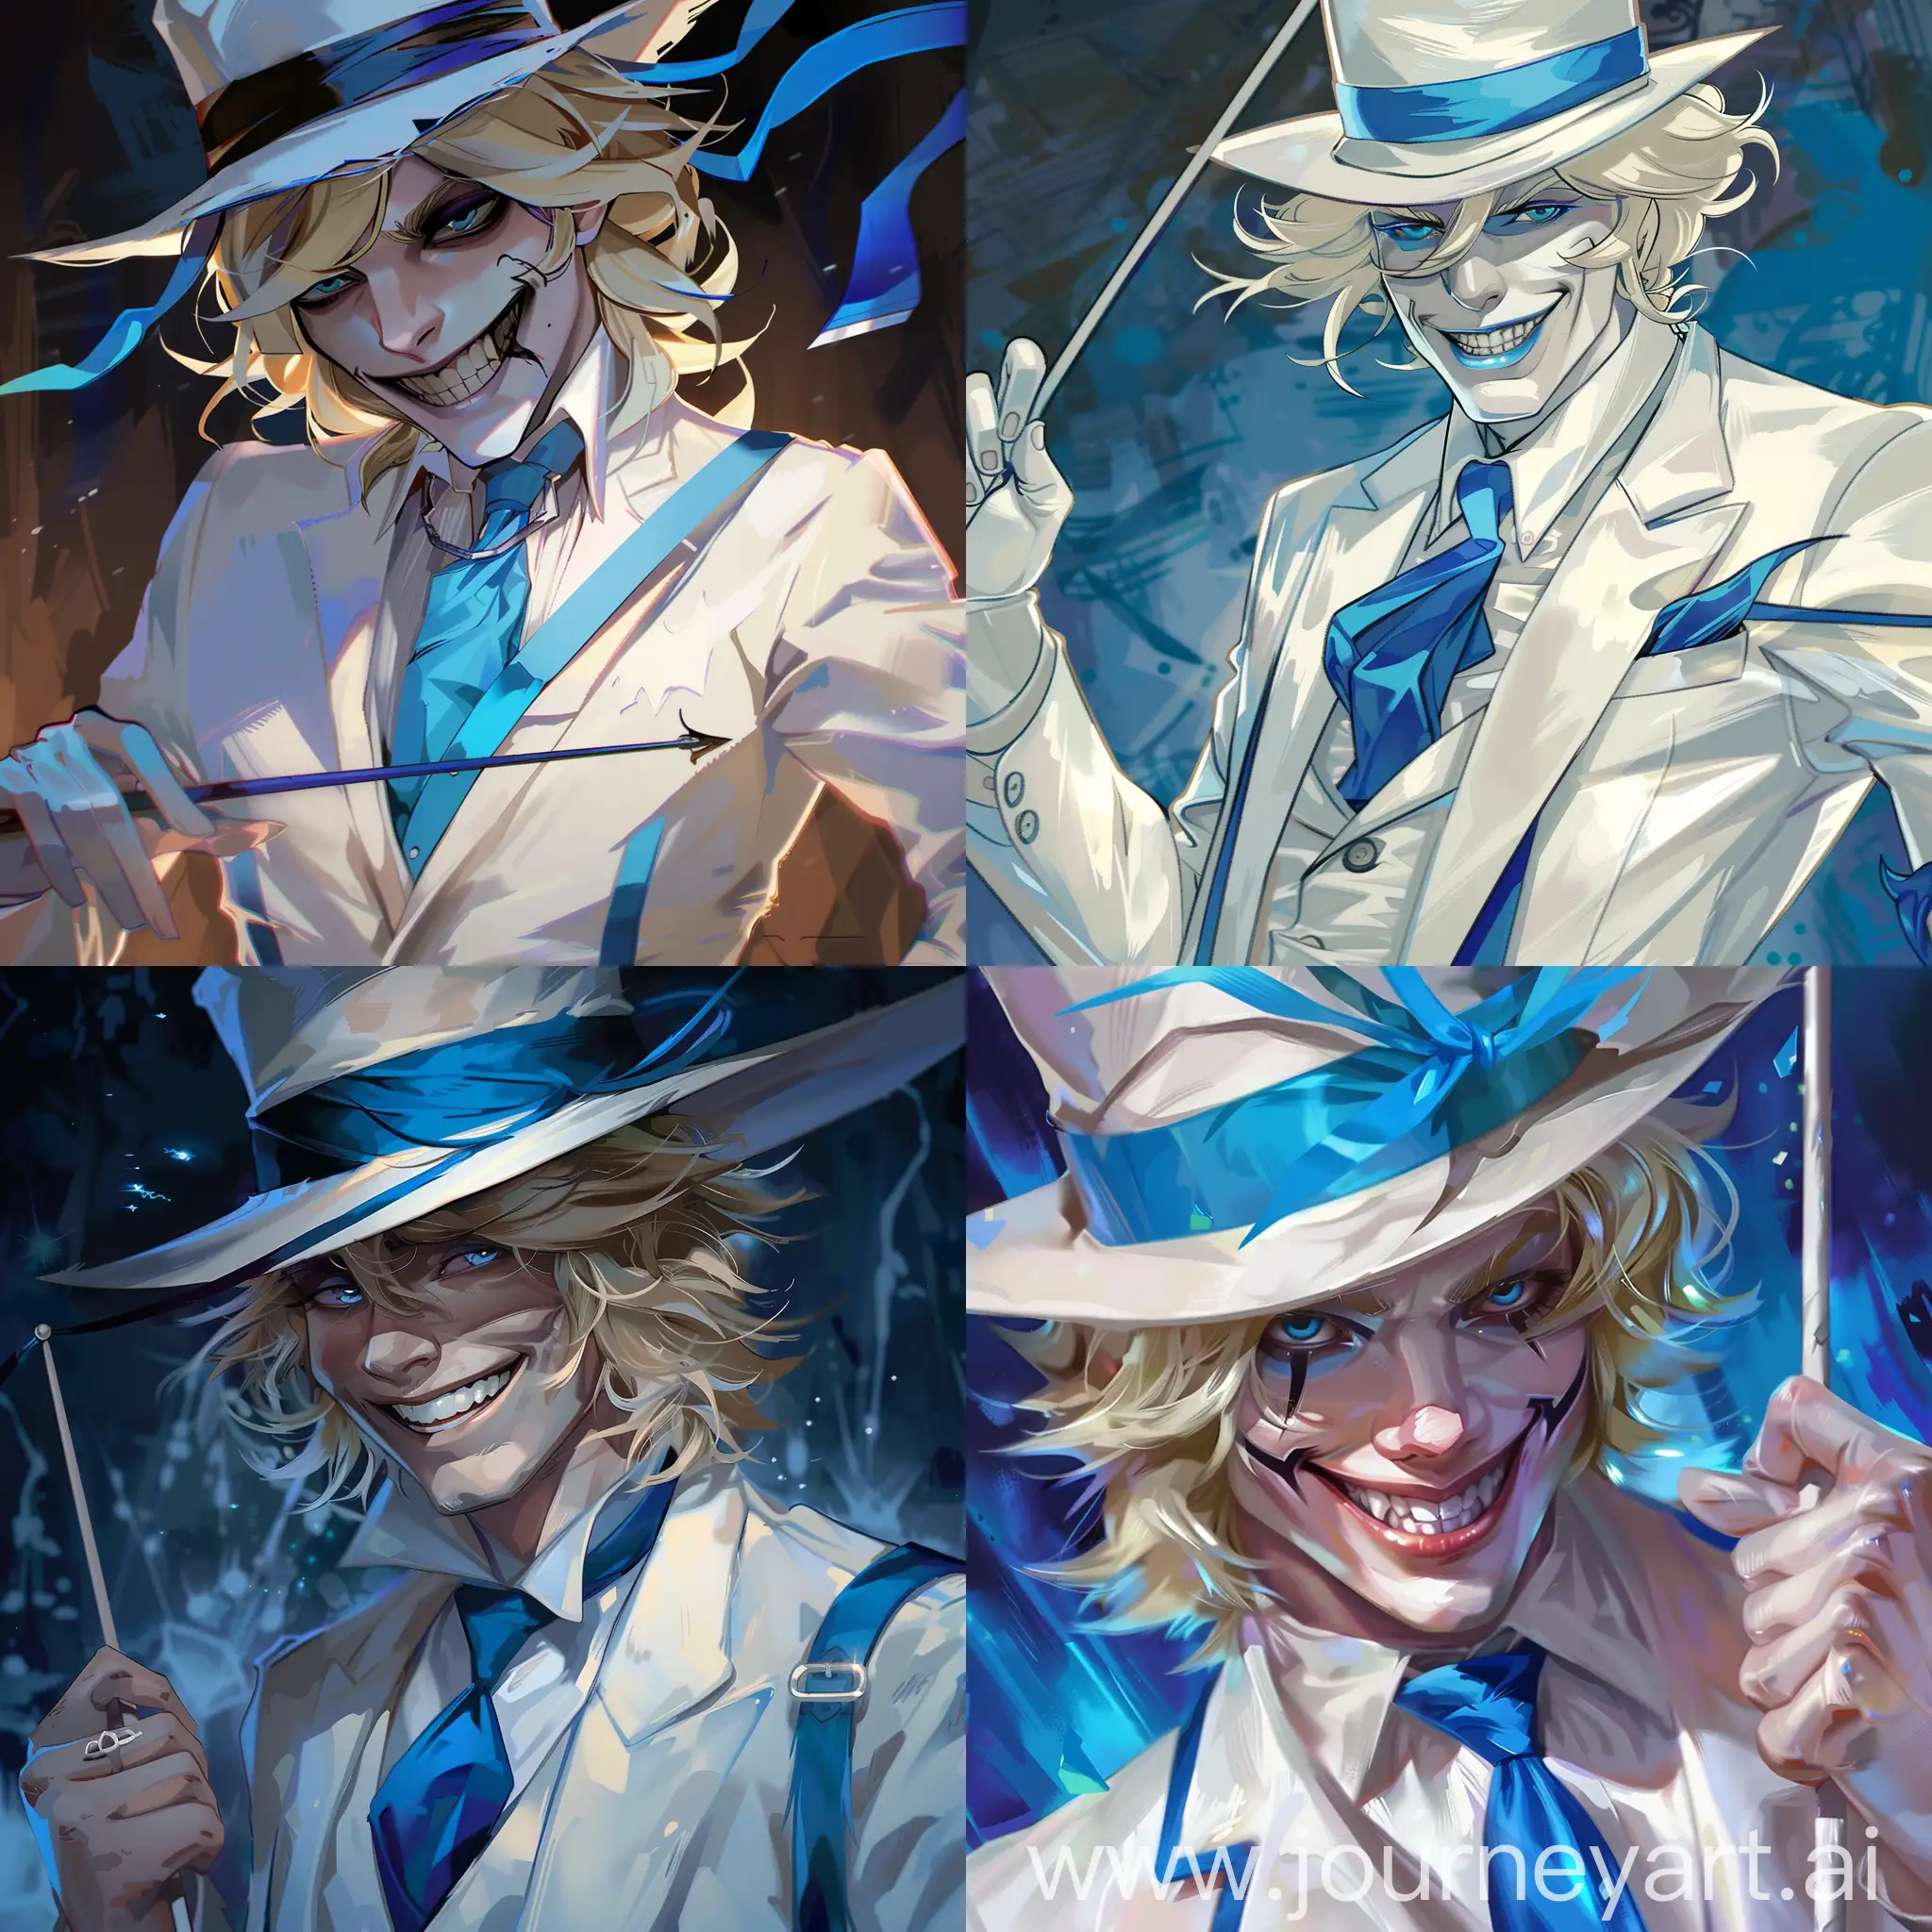 Male, White skin, blonde hair, human body, white suit with blue straps, blue tie, white hat with blue ribbon, sharp teeth, smiling, magic stick, Hazbin hotel art style